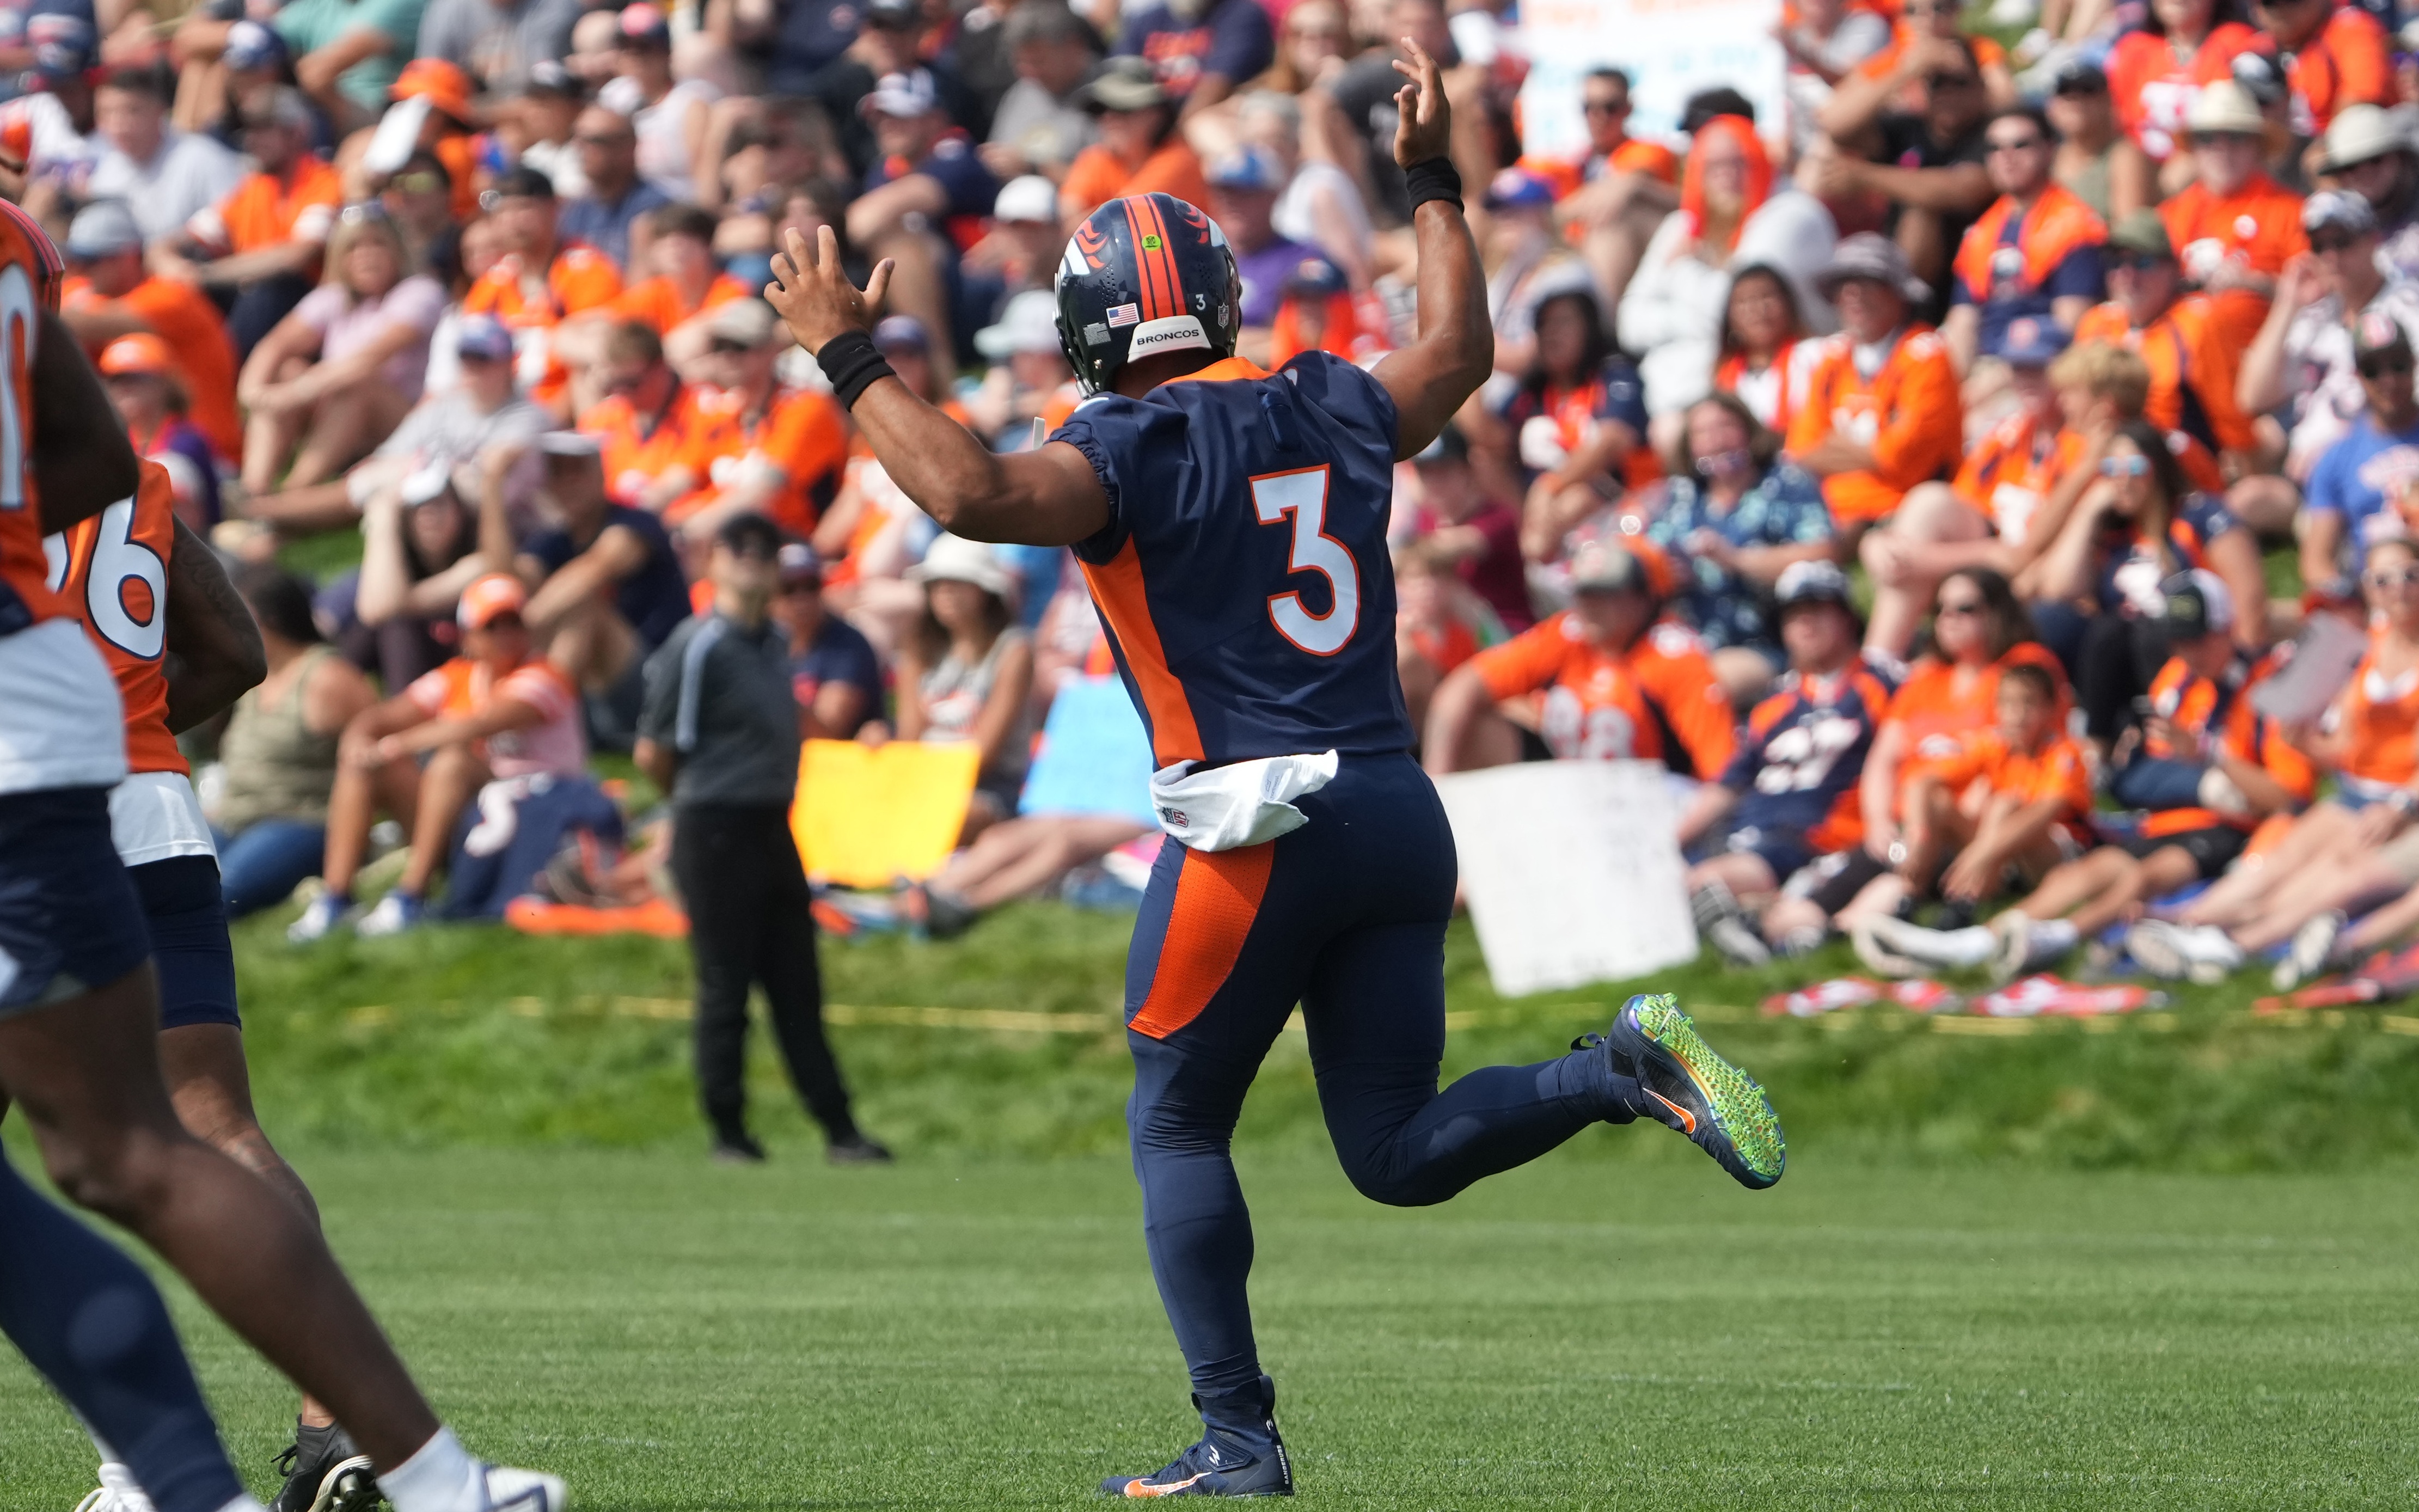 Russell Wilson lighting it up at Broncos training camp. Credit: Ron Chenoy, USA TODAY Sports.